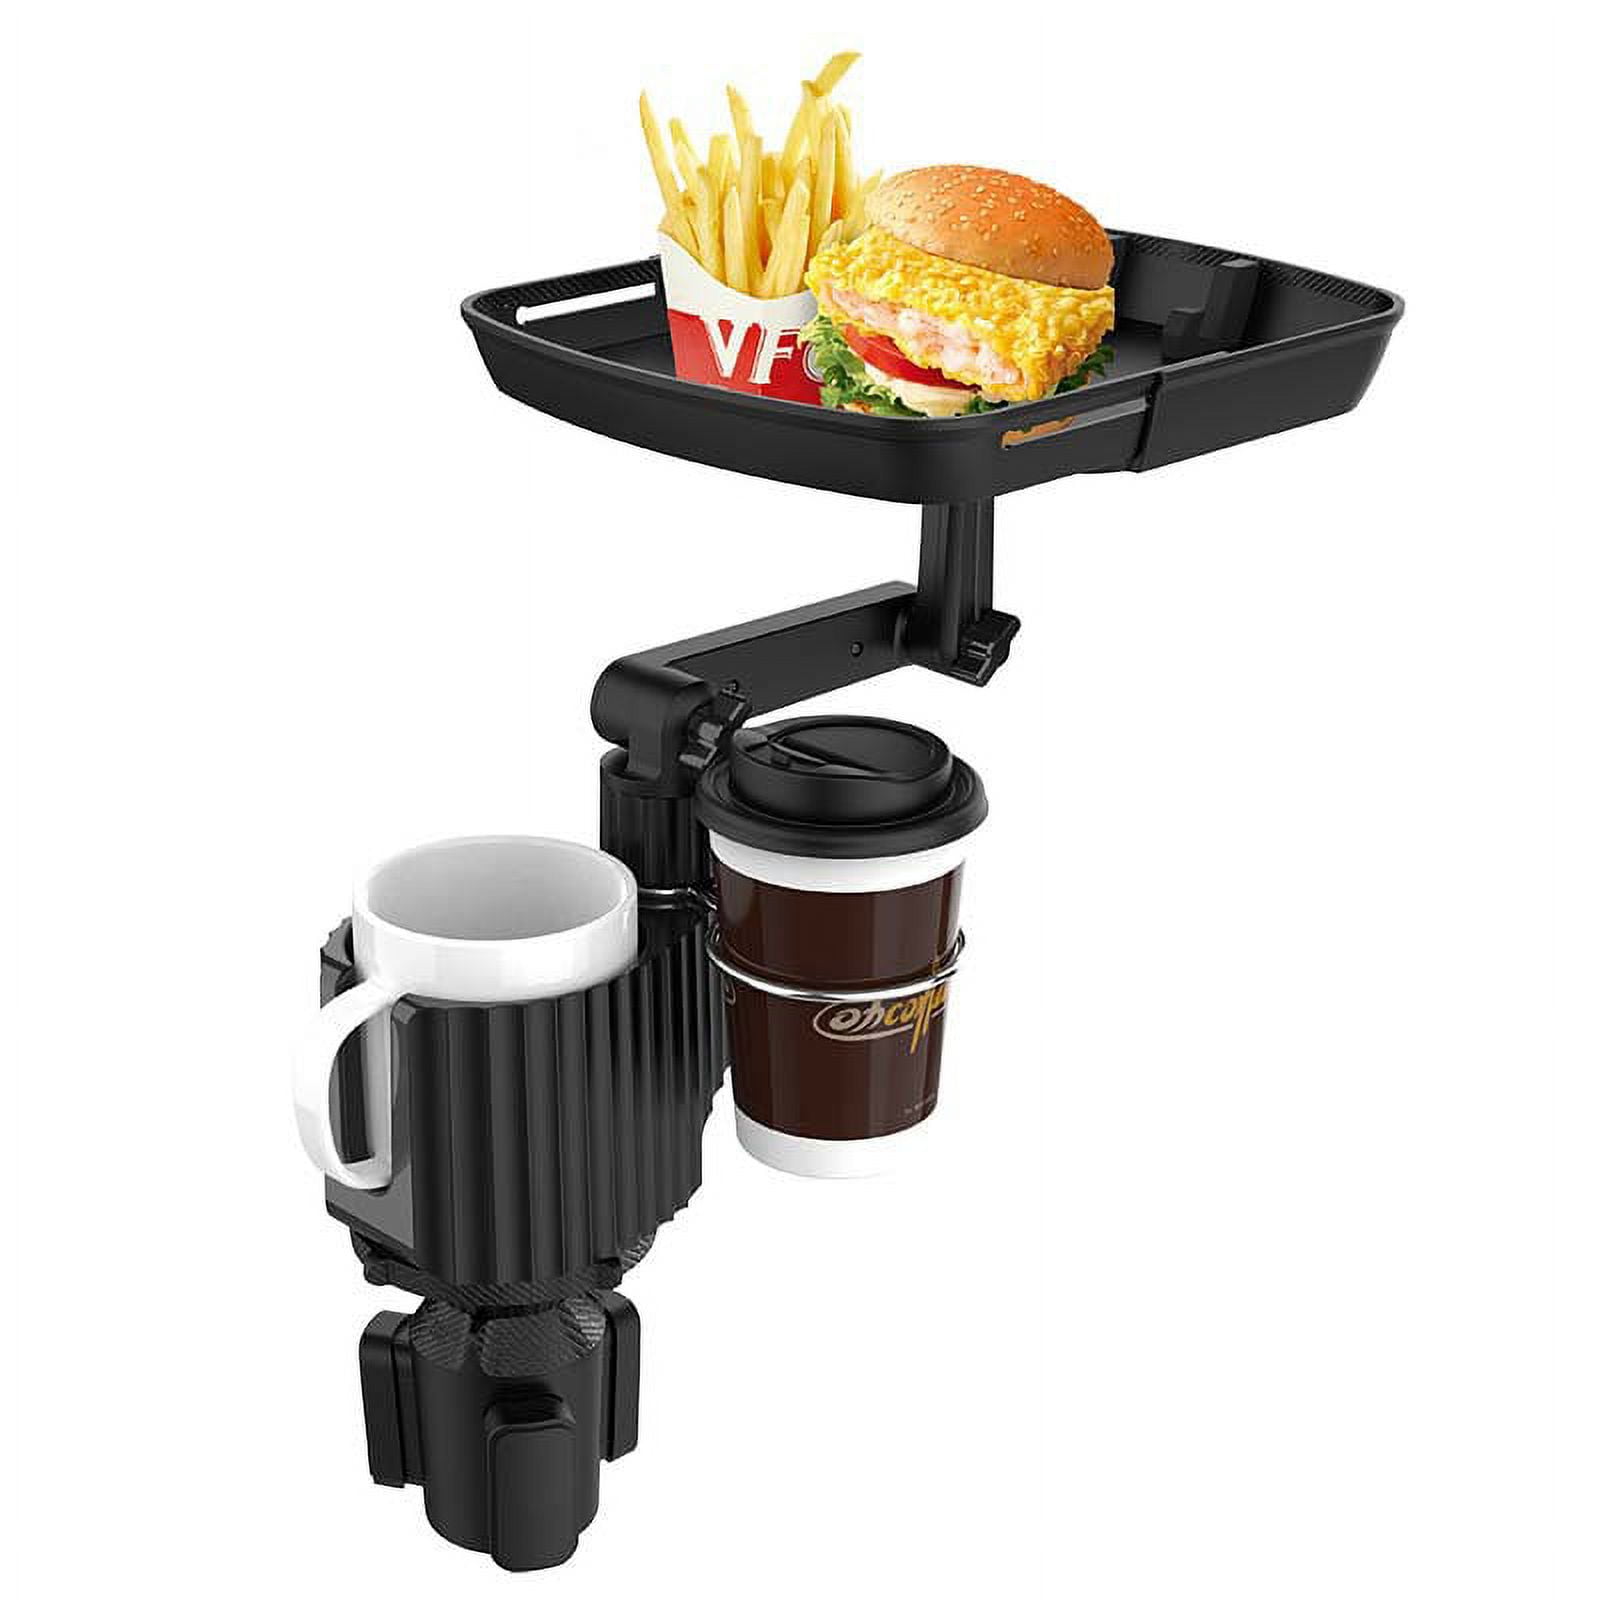 DriveDine Car Cup Holder Tray - Stay Organized and Enjoy Your Meals on the  Go!